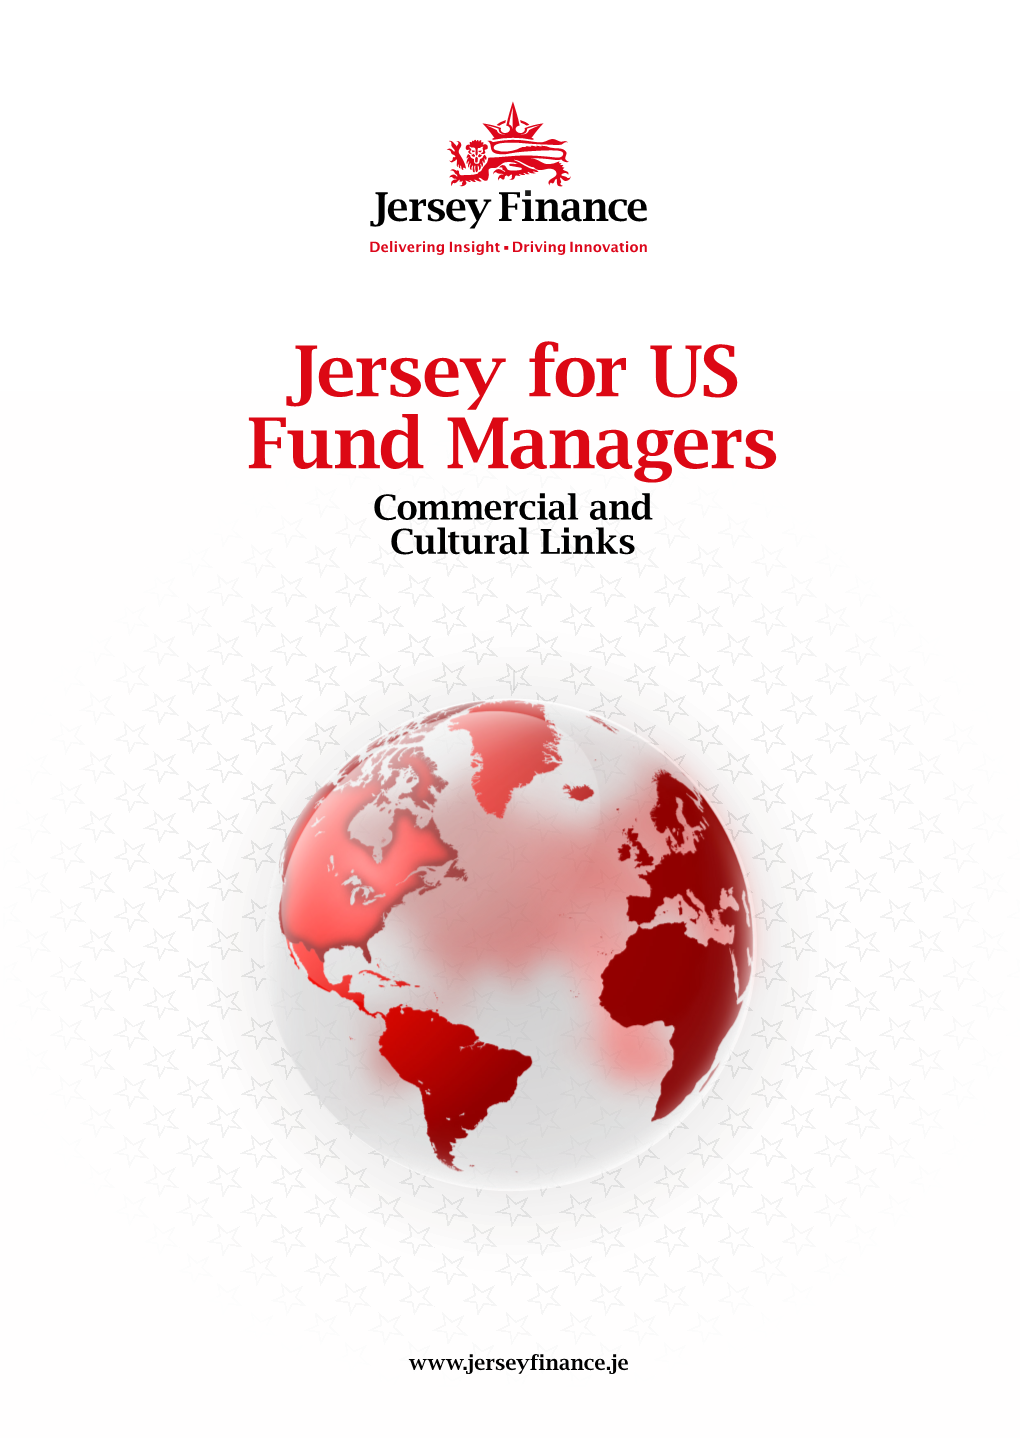 'Jersey for US Fund Managers' Brochure